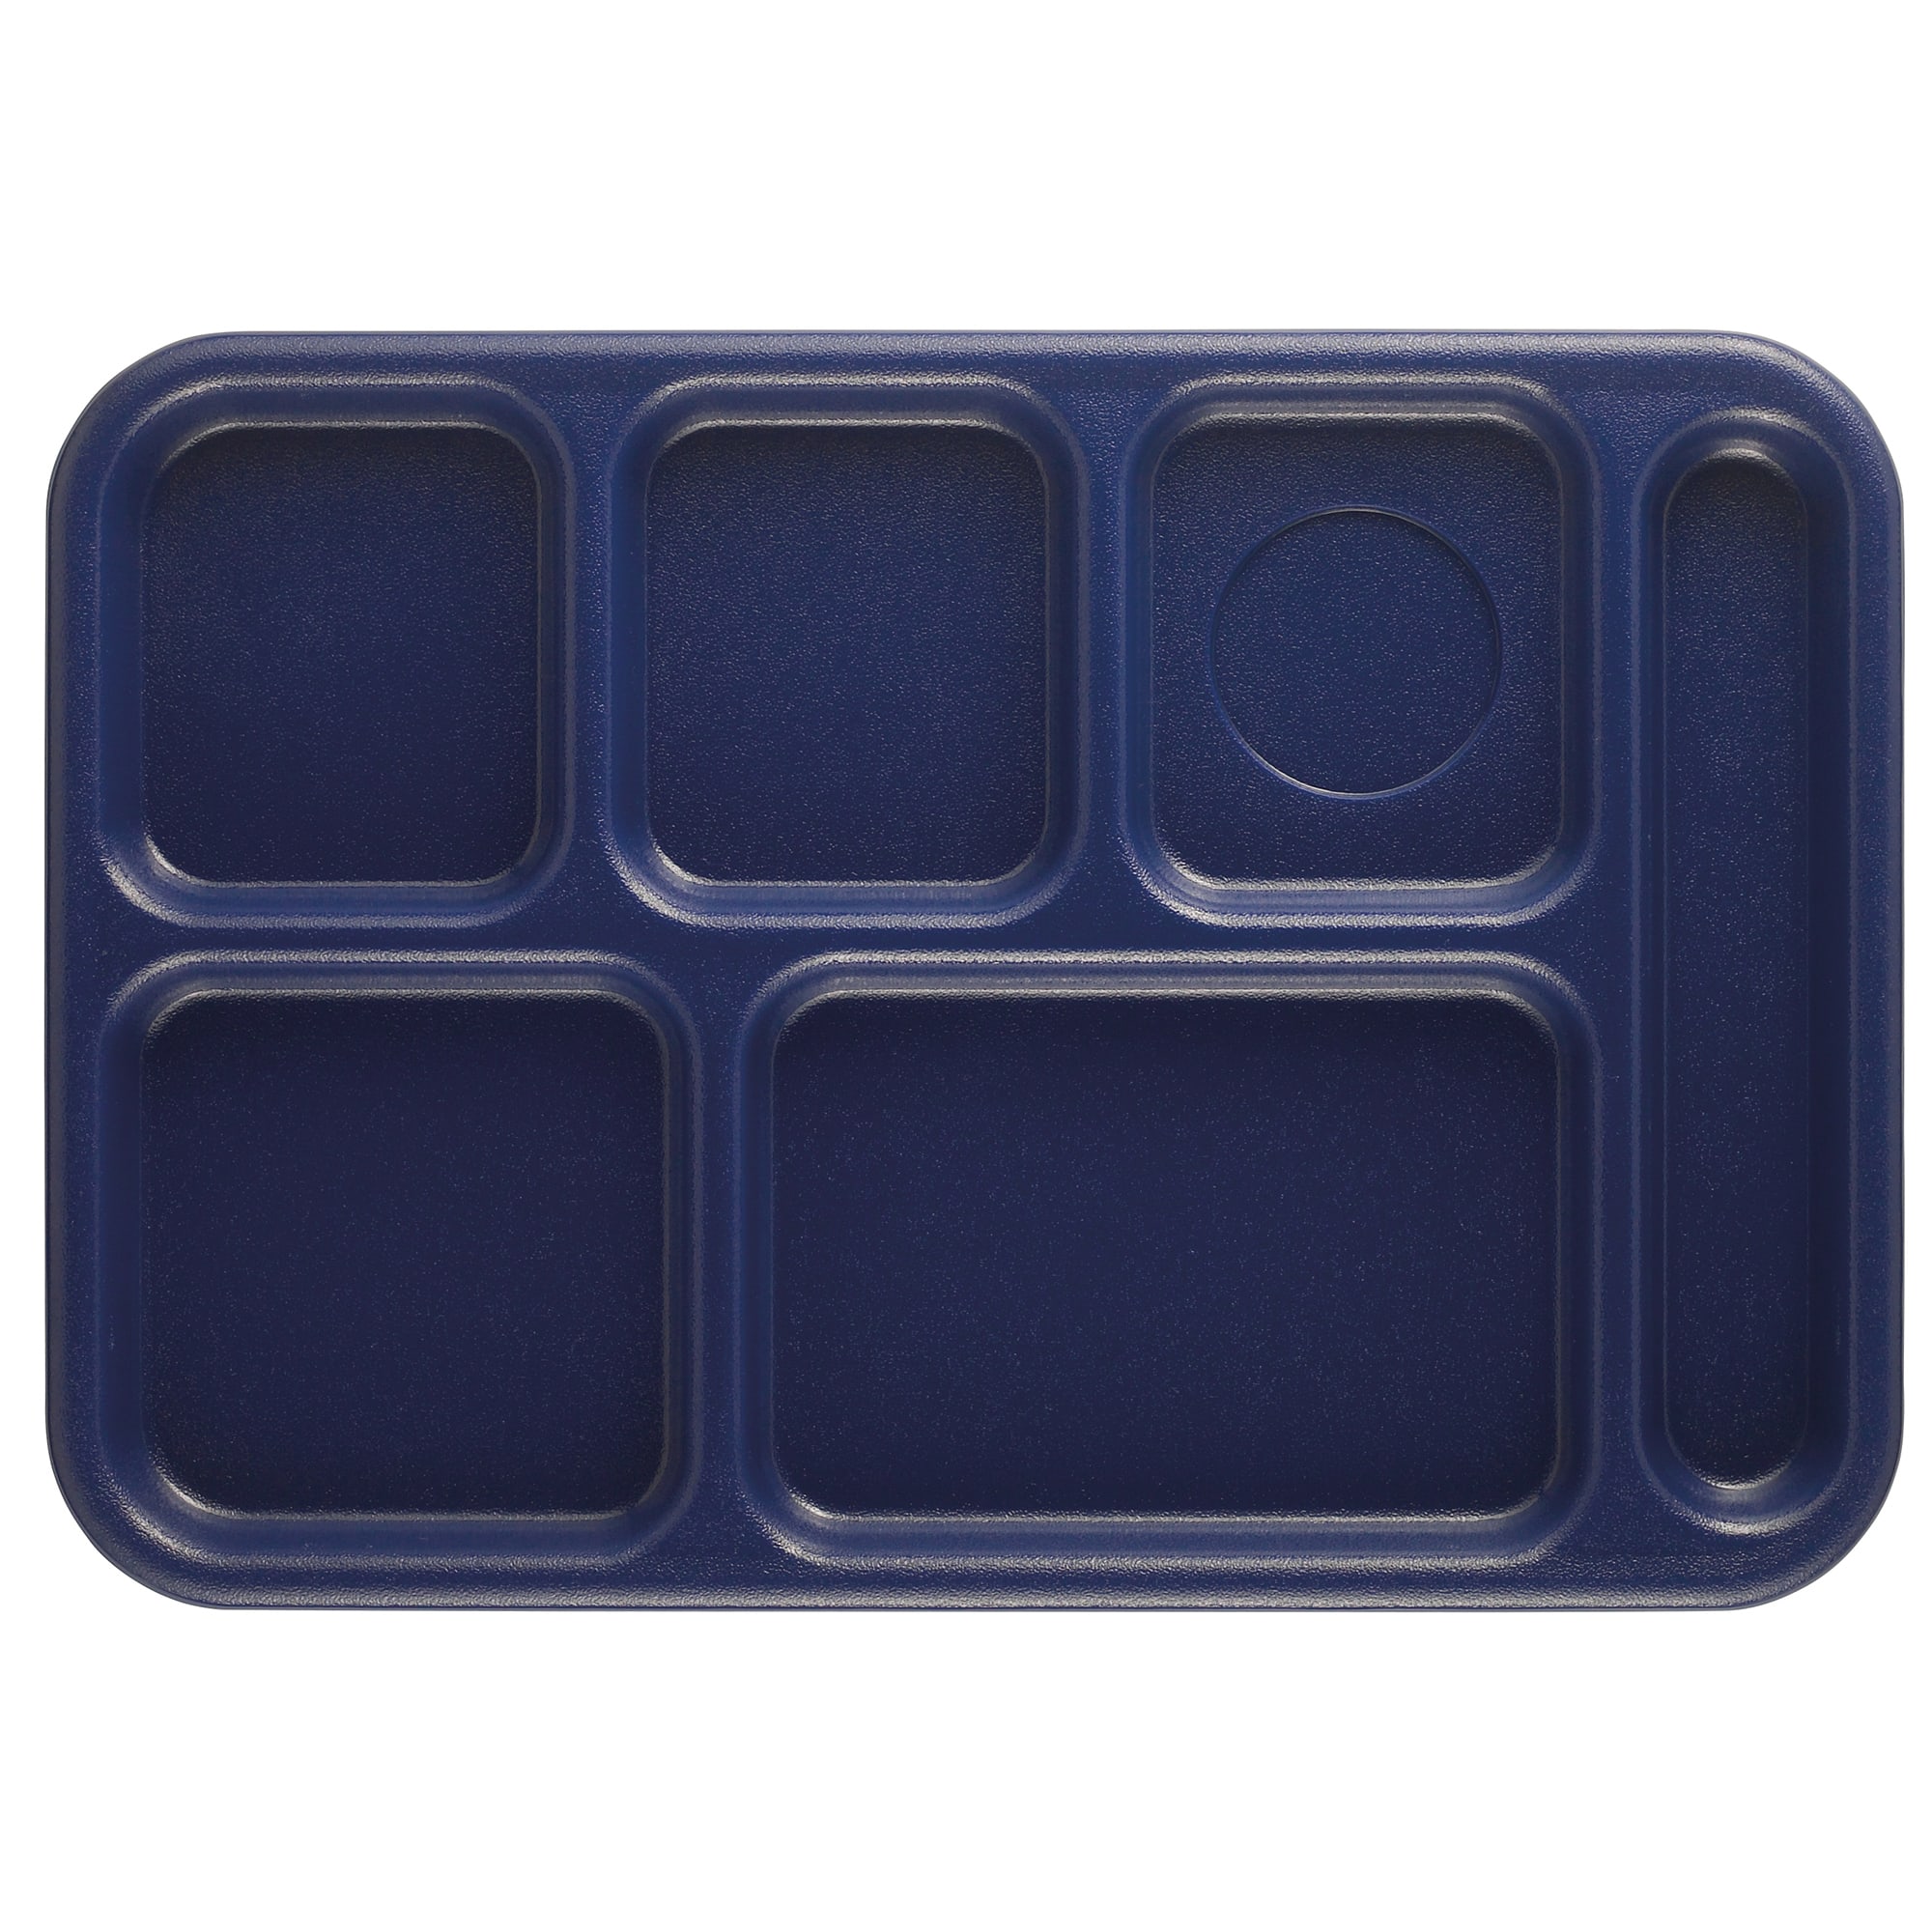 Cambro 10146CW186 Penny-Saver Navy Blue 6-Compartment Serving Tray